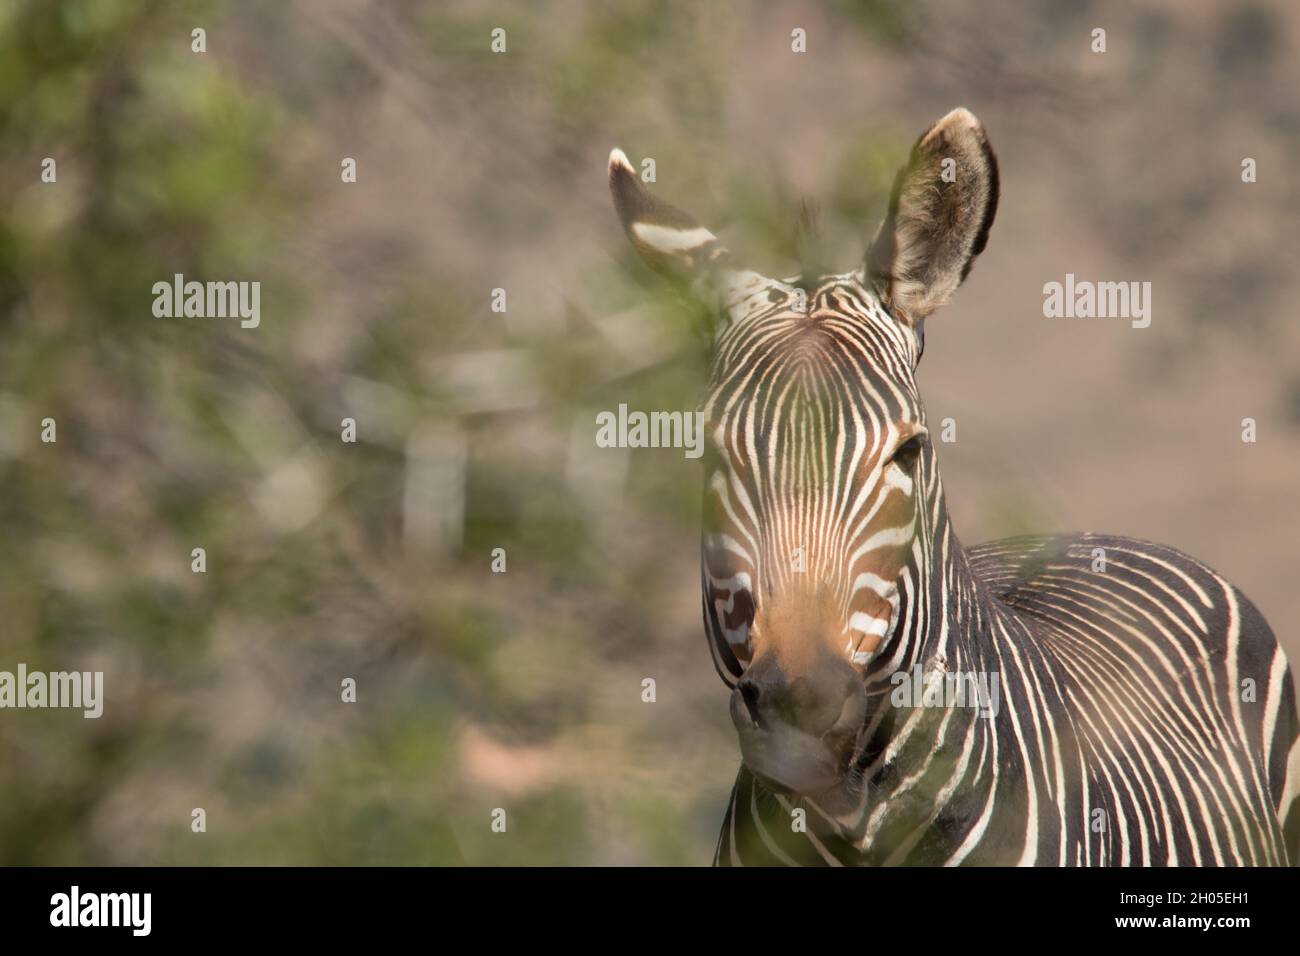 A zebra in a hot, harsh African landscape. Stock Photo